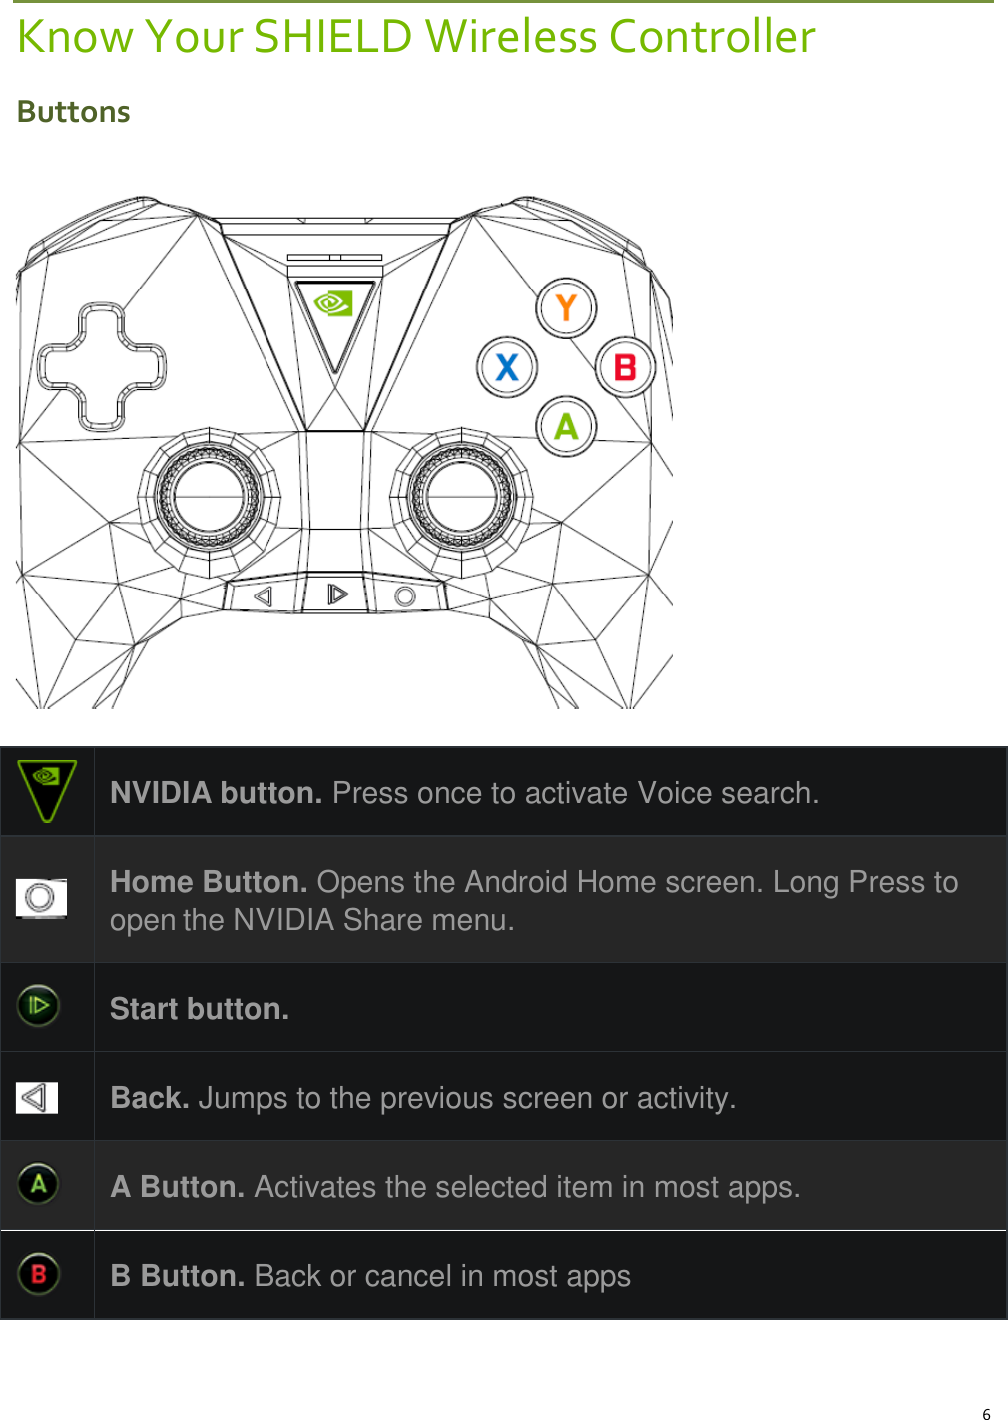 6 Know Your SHIELD Wireless Controller Buttons     NVIDIA button. Press once to activate Voice search.  Home Button. Opens the Android Home screen. Long Press to open the NVIDIA Share menu.  Start button.  Back. Jumps to the previous screen or activity.  A Button. Activates the selected item in most apps.  B Button. Back or cancel in most apps 